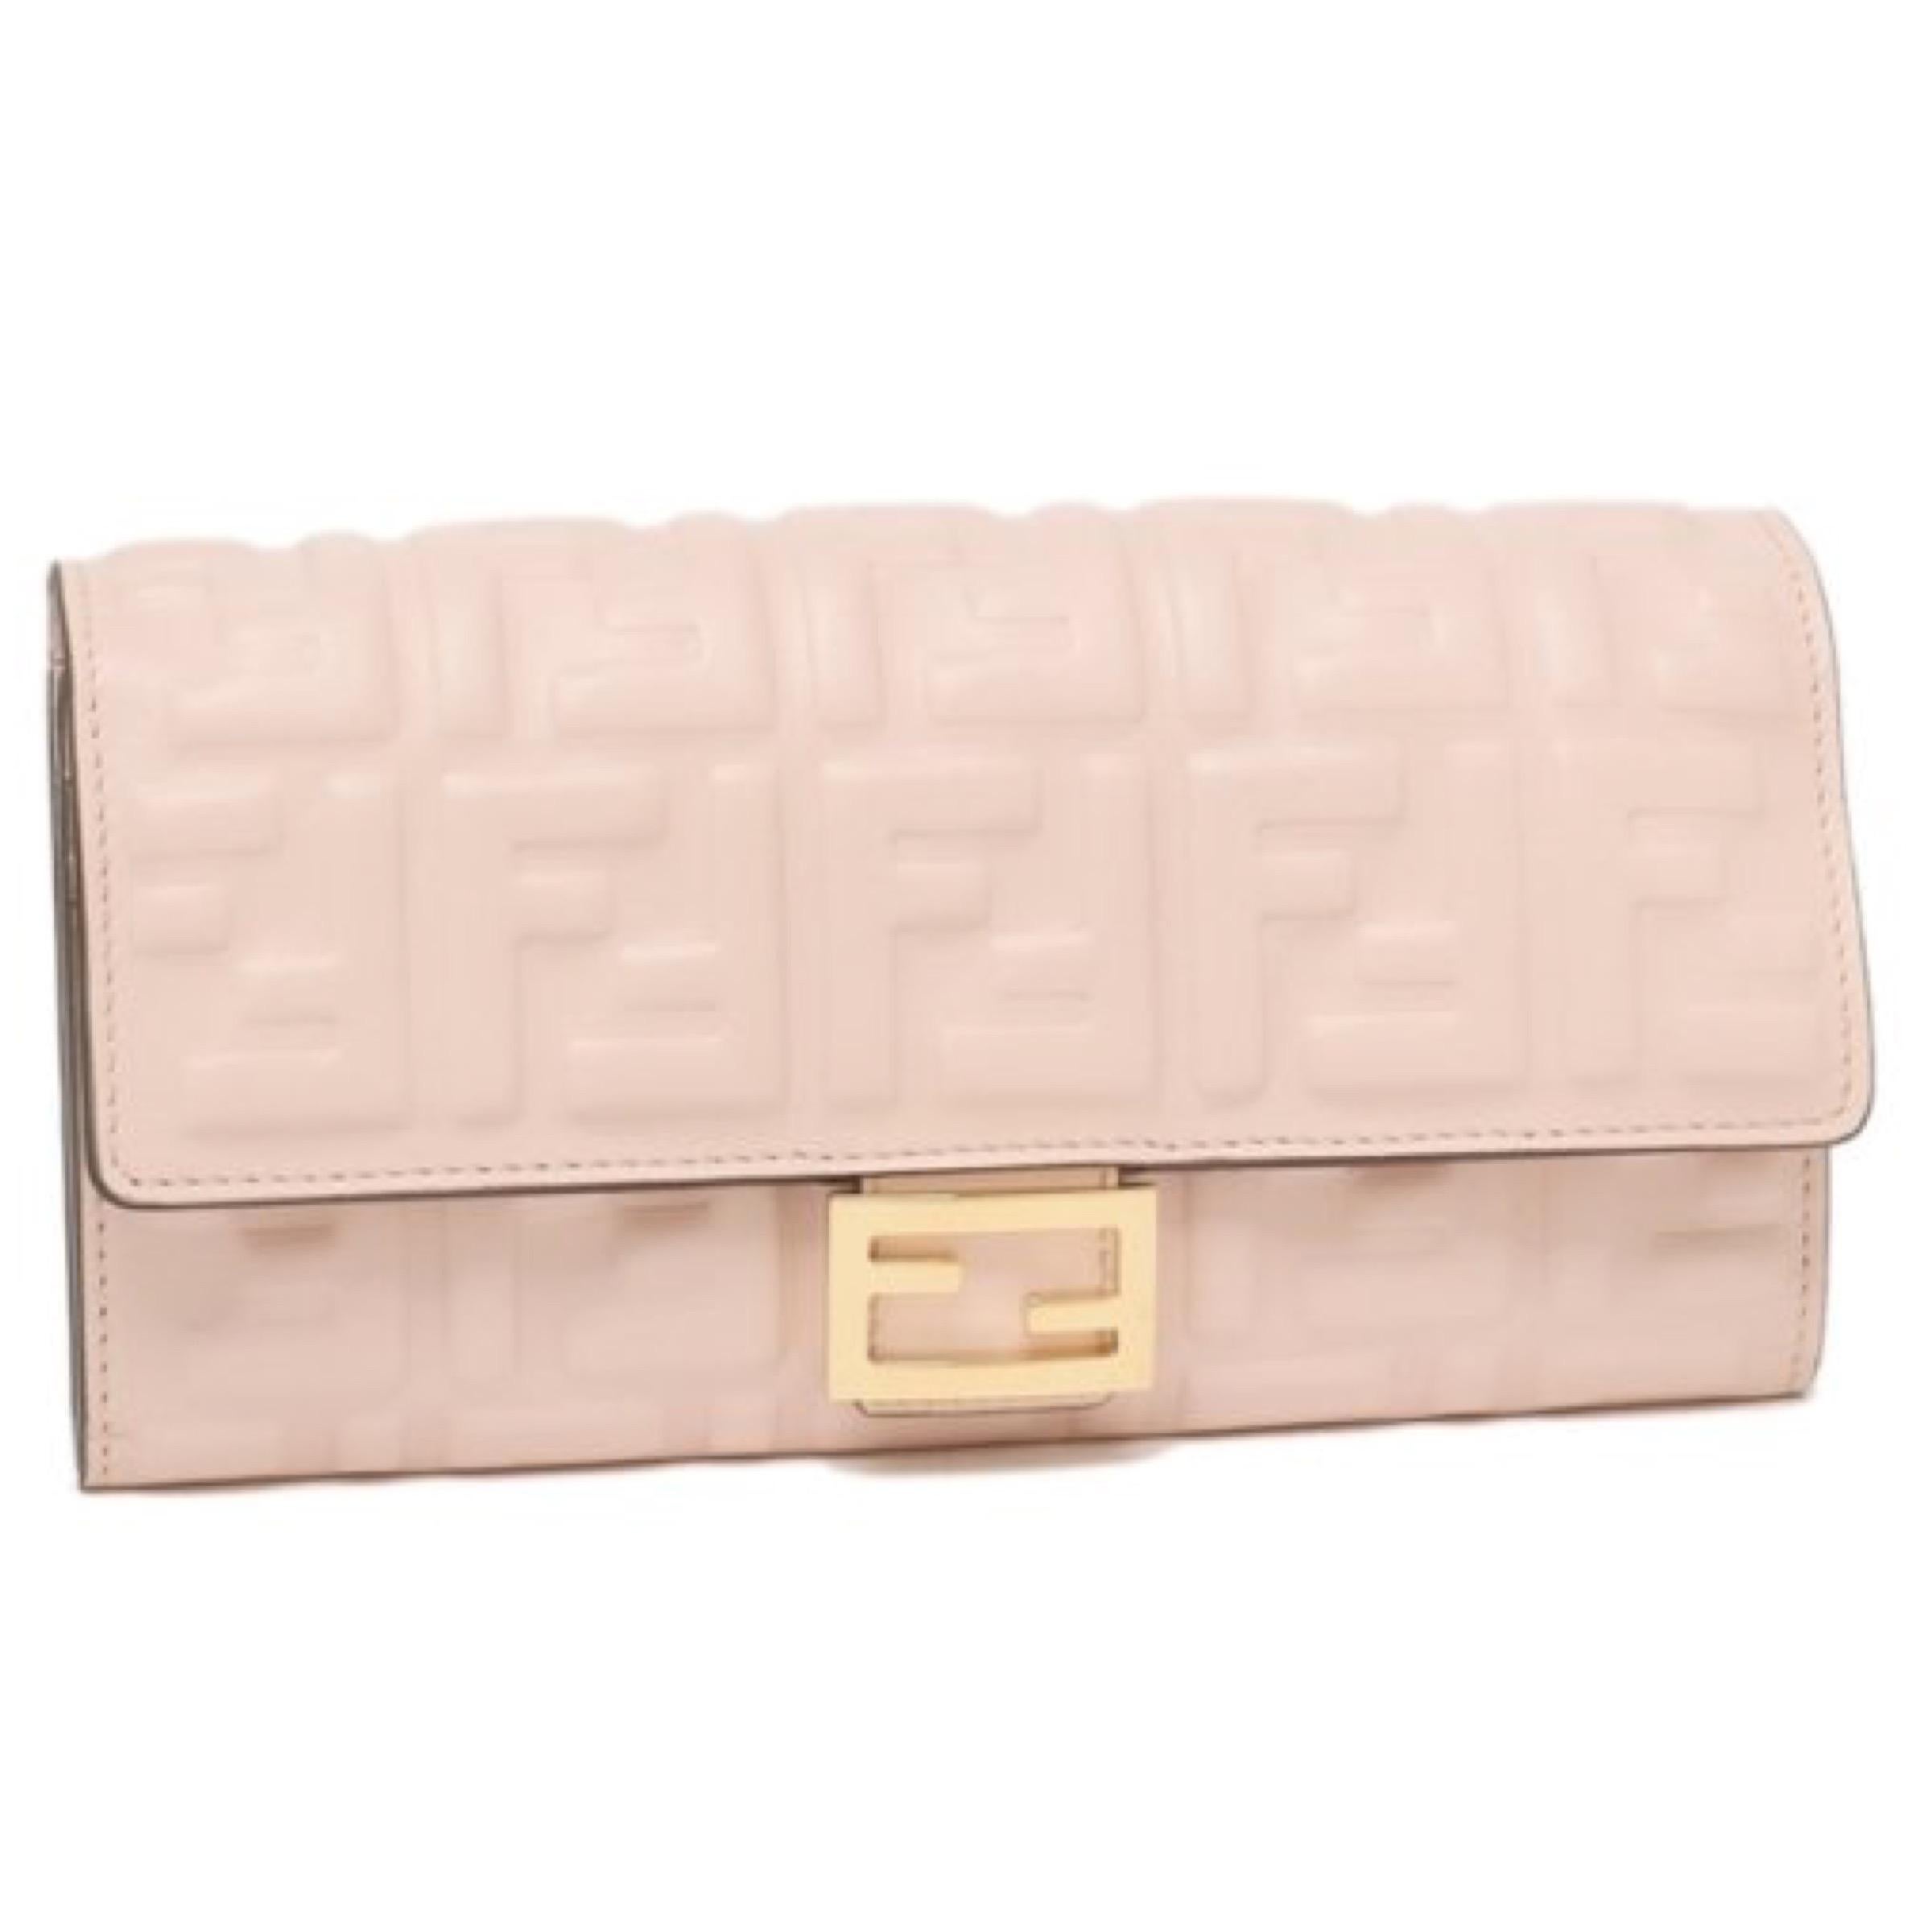 New Fendi Candy Pink Baguette FF Monogram Leather Continental Wallet Clutch Bag

Authenticity Guaranteed

DETAILS
Brand: Fendi
Condition: Brand new
Gender: Women
Category: Clutch
Color: Candy pink
Material: Leather
Front logo plaque
Monogram